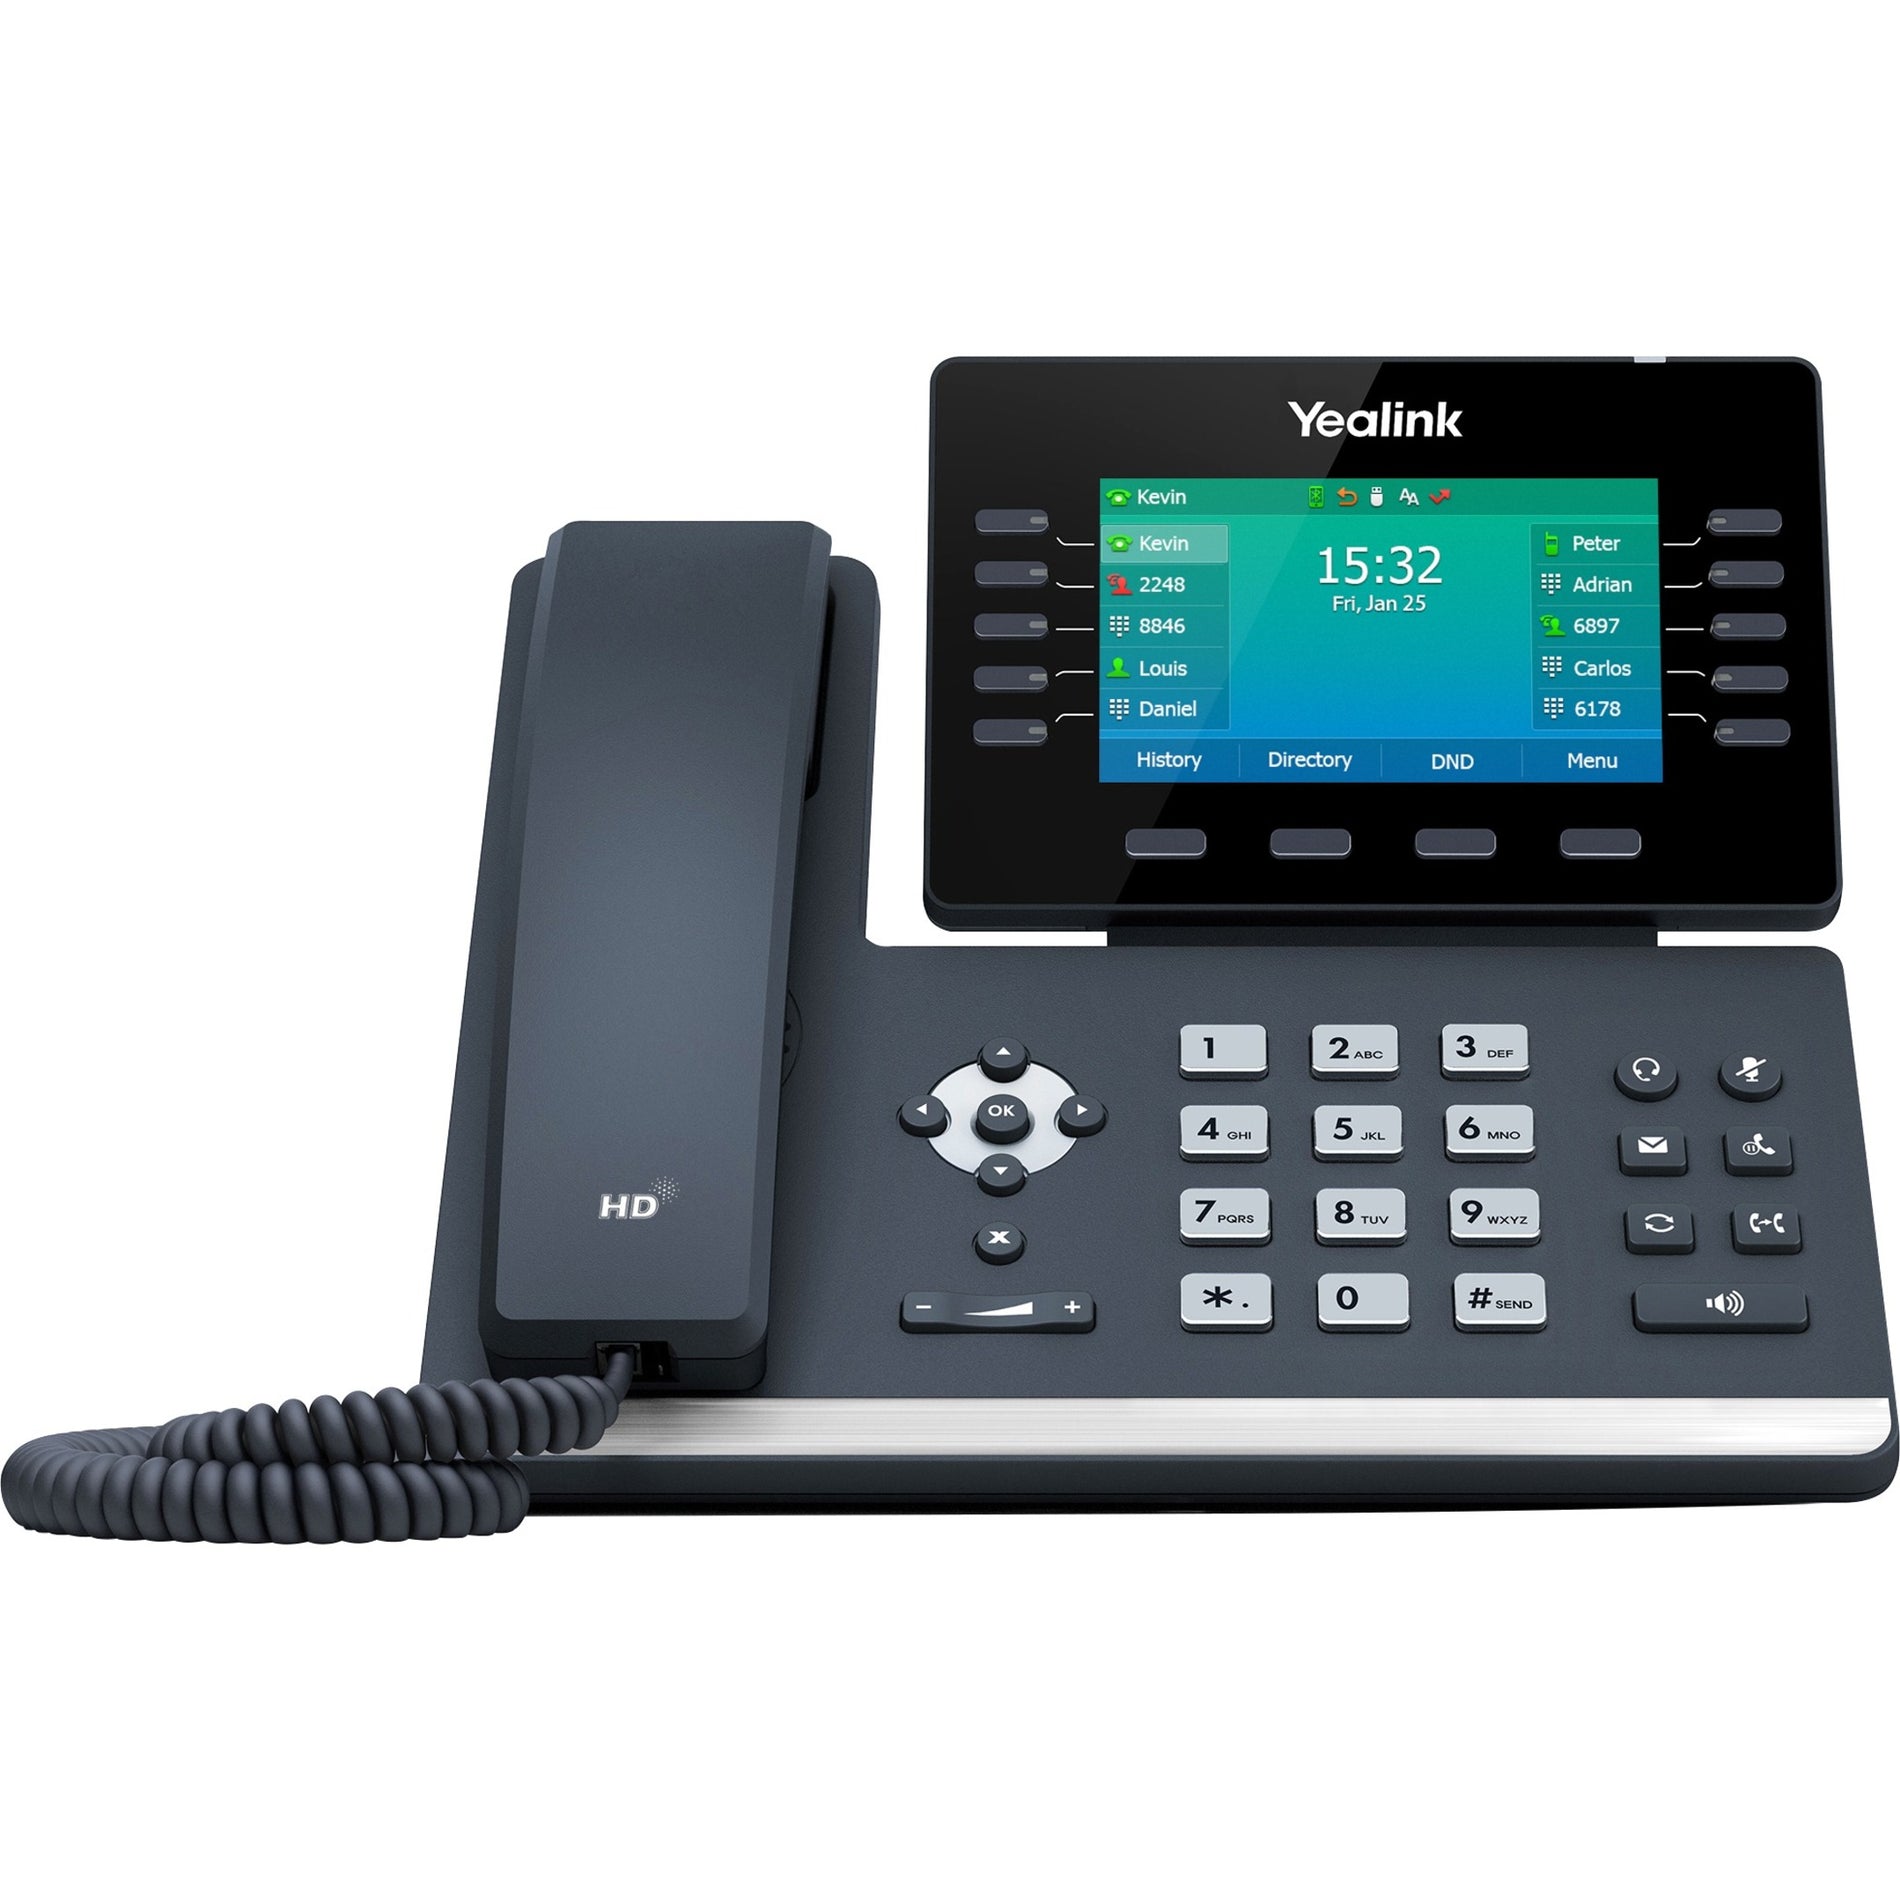 Yealink Prime Business Phone with 4.4in. color LCD Screen and built-in Bluetooth 4.2 (power supply not included) (SIP-T54W)